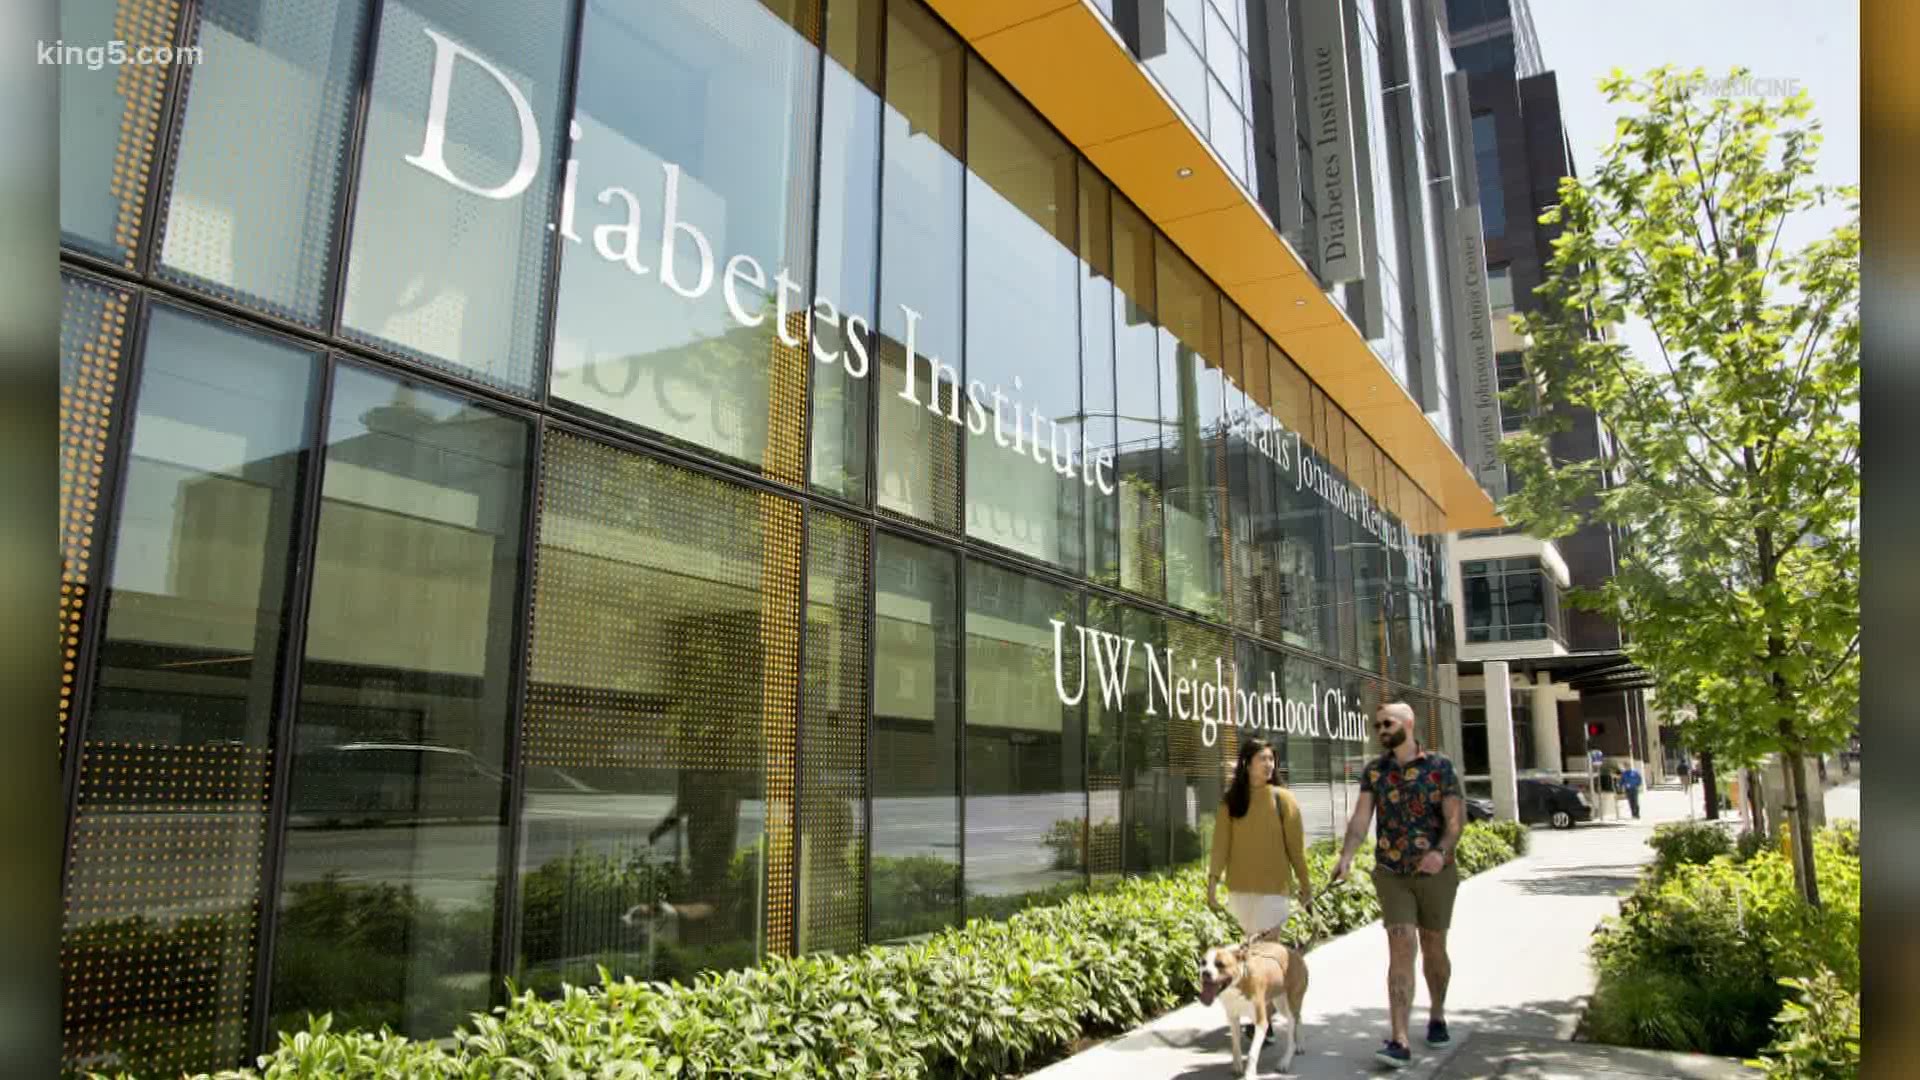 The University of Washington opens up a new Latinx Diabetes Center targeted to help those whose primary language is Spanish.